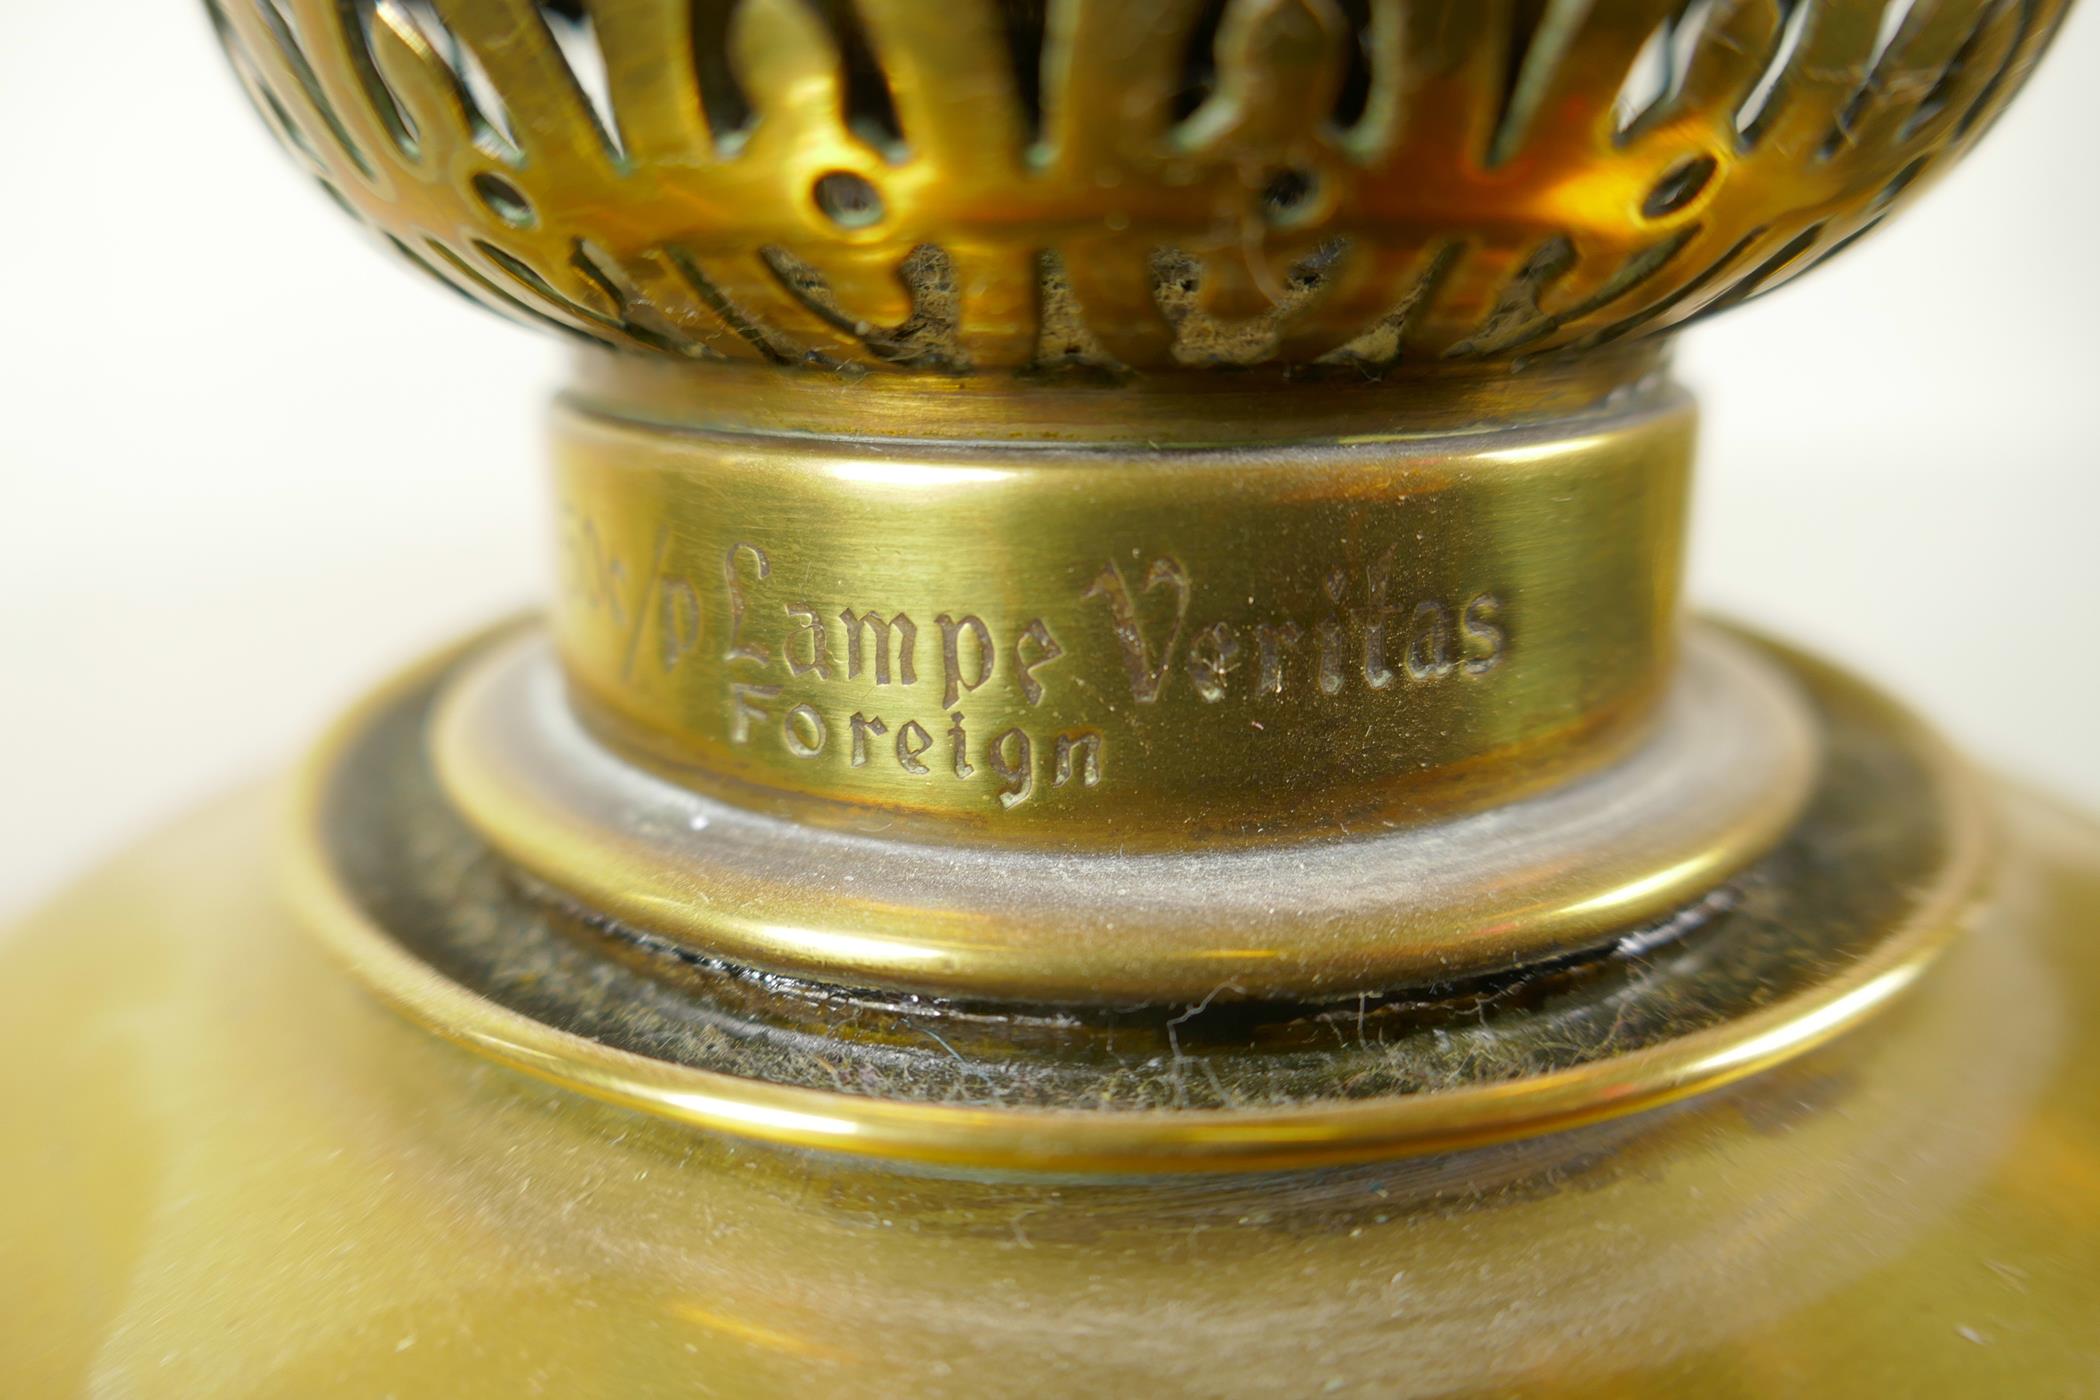 Three late Victorian brass oil lamp burners including glass chimneys, two beautifully cast in a - Image 4 of 6